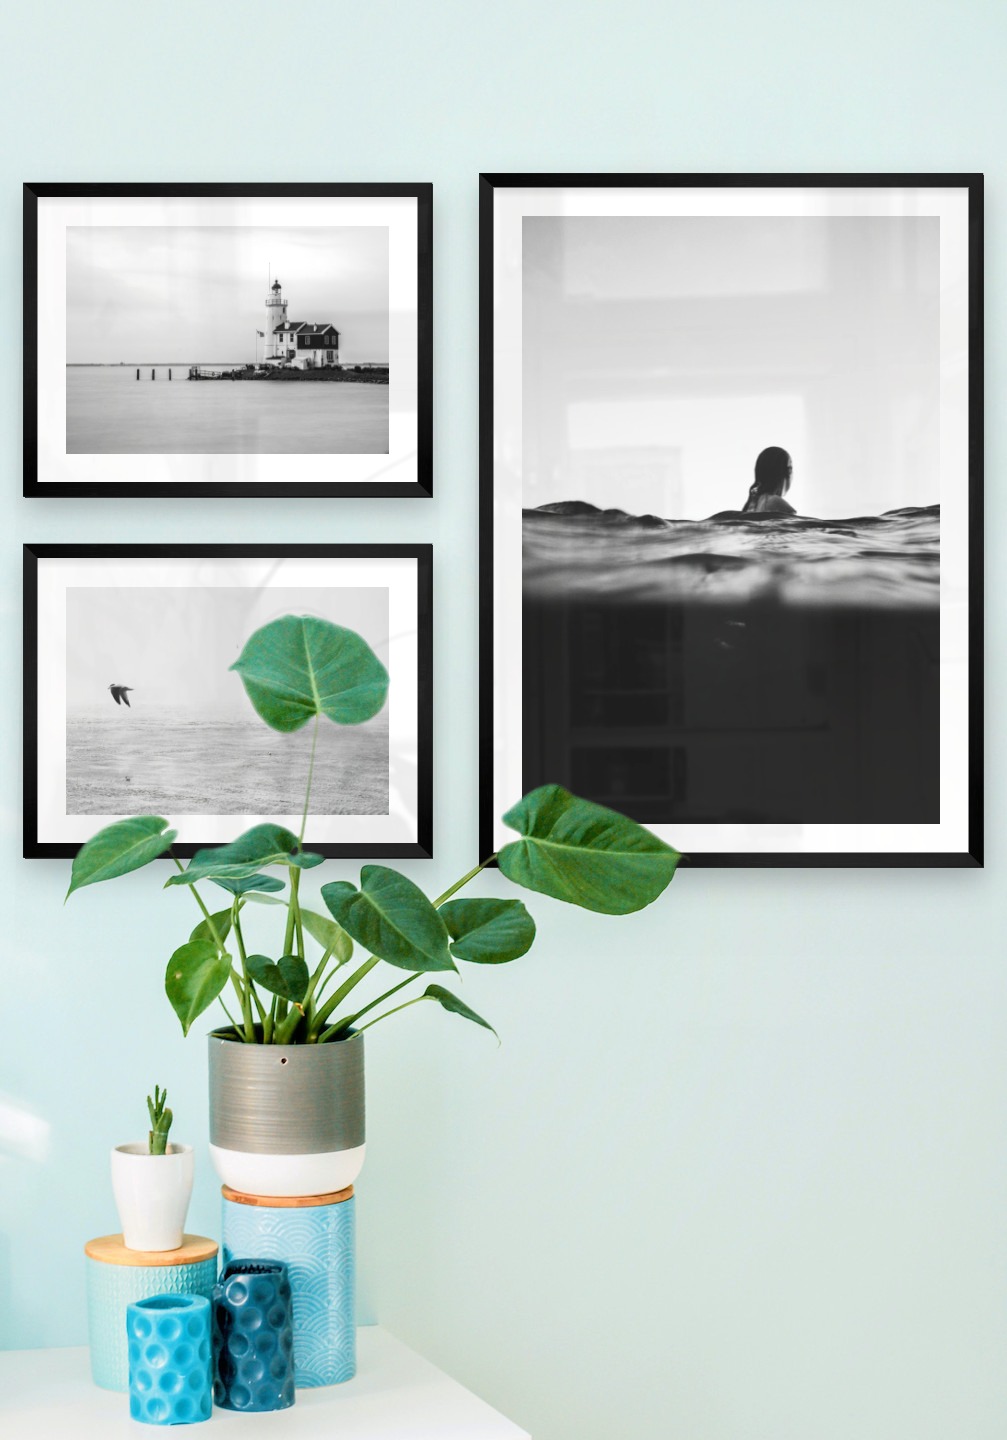 Gallery wall with picture frames in black in sizes 30x40 and 50x70 with prints "Pier with building", "Birds over the sea" and "Person in the water"